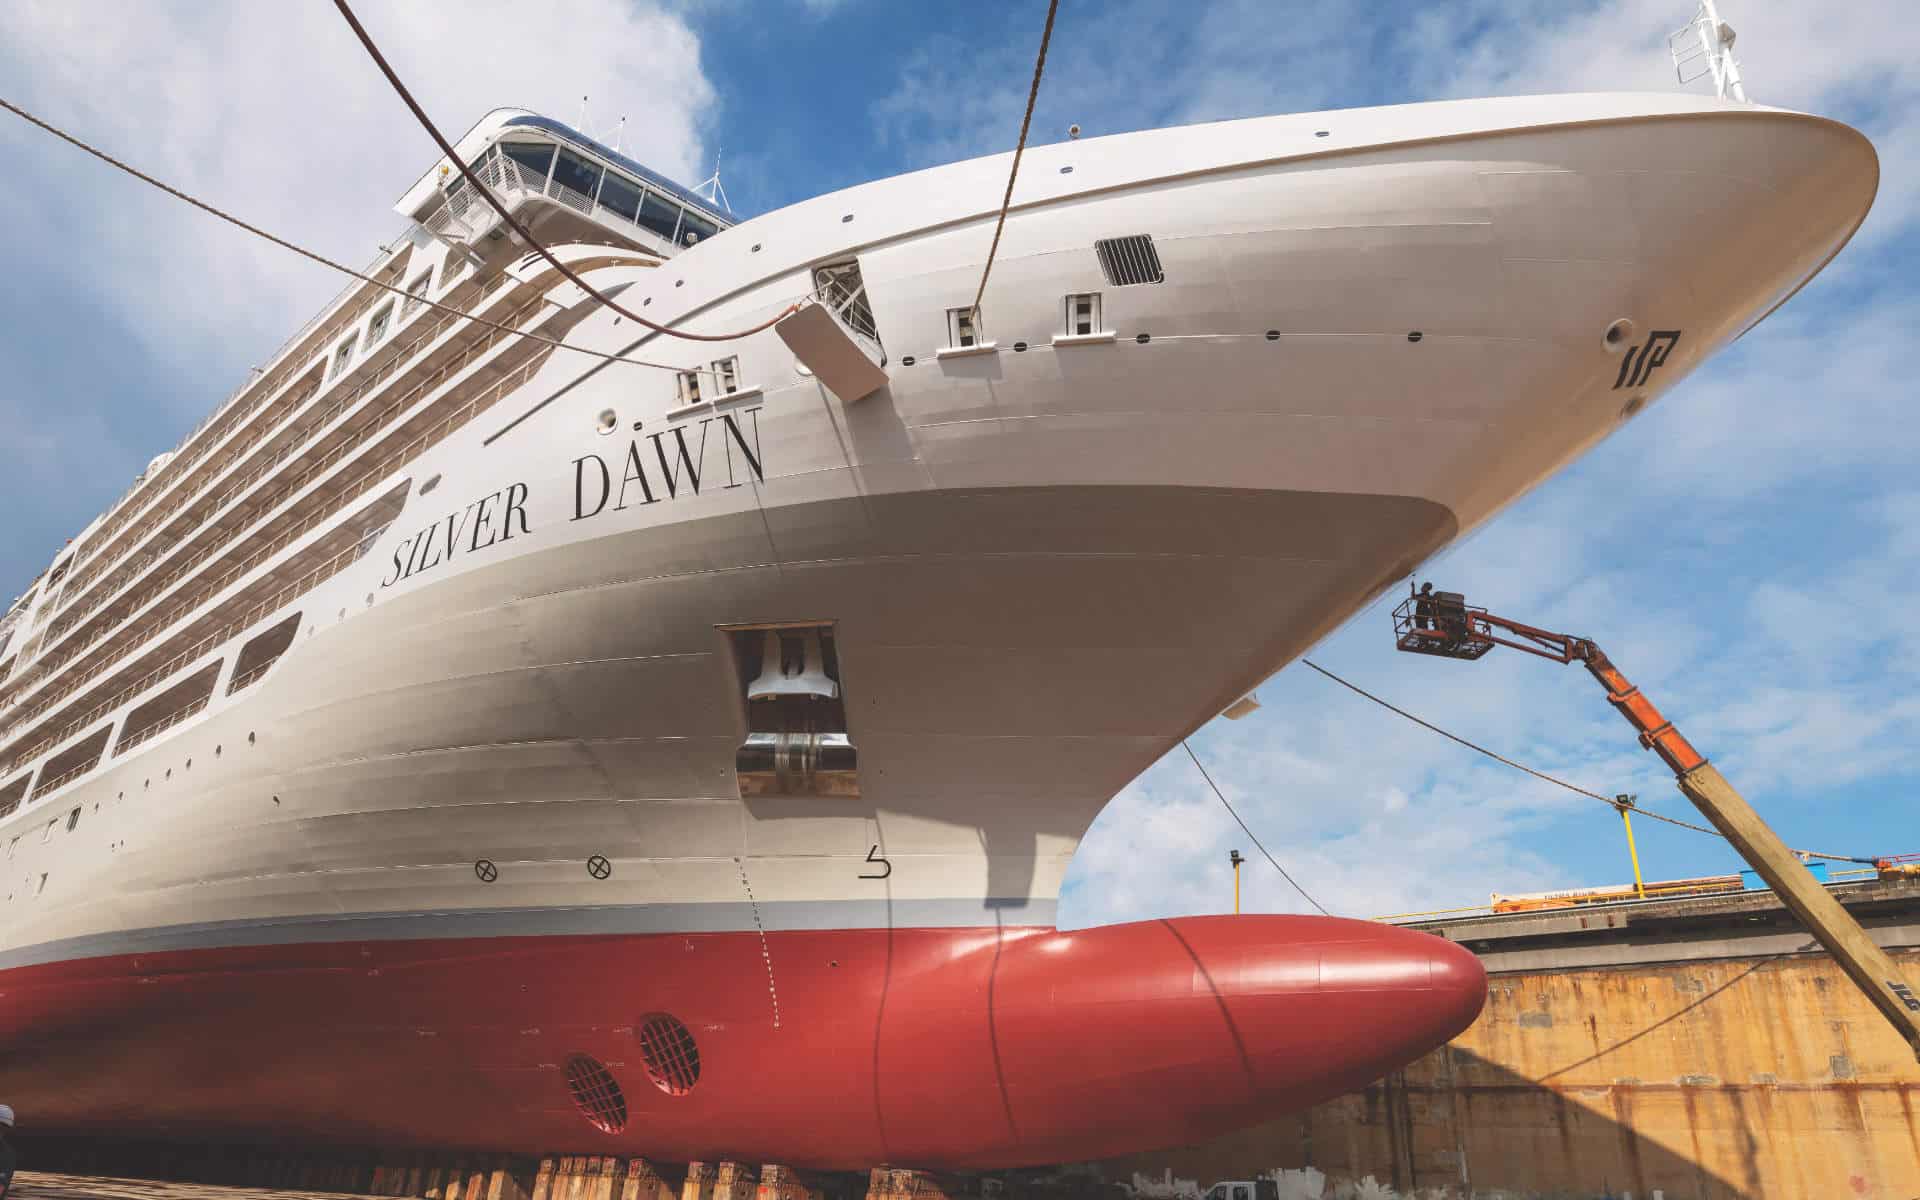 Construction of Silver Dawn is complete and the vessel has been delivered.